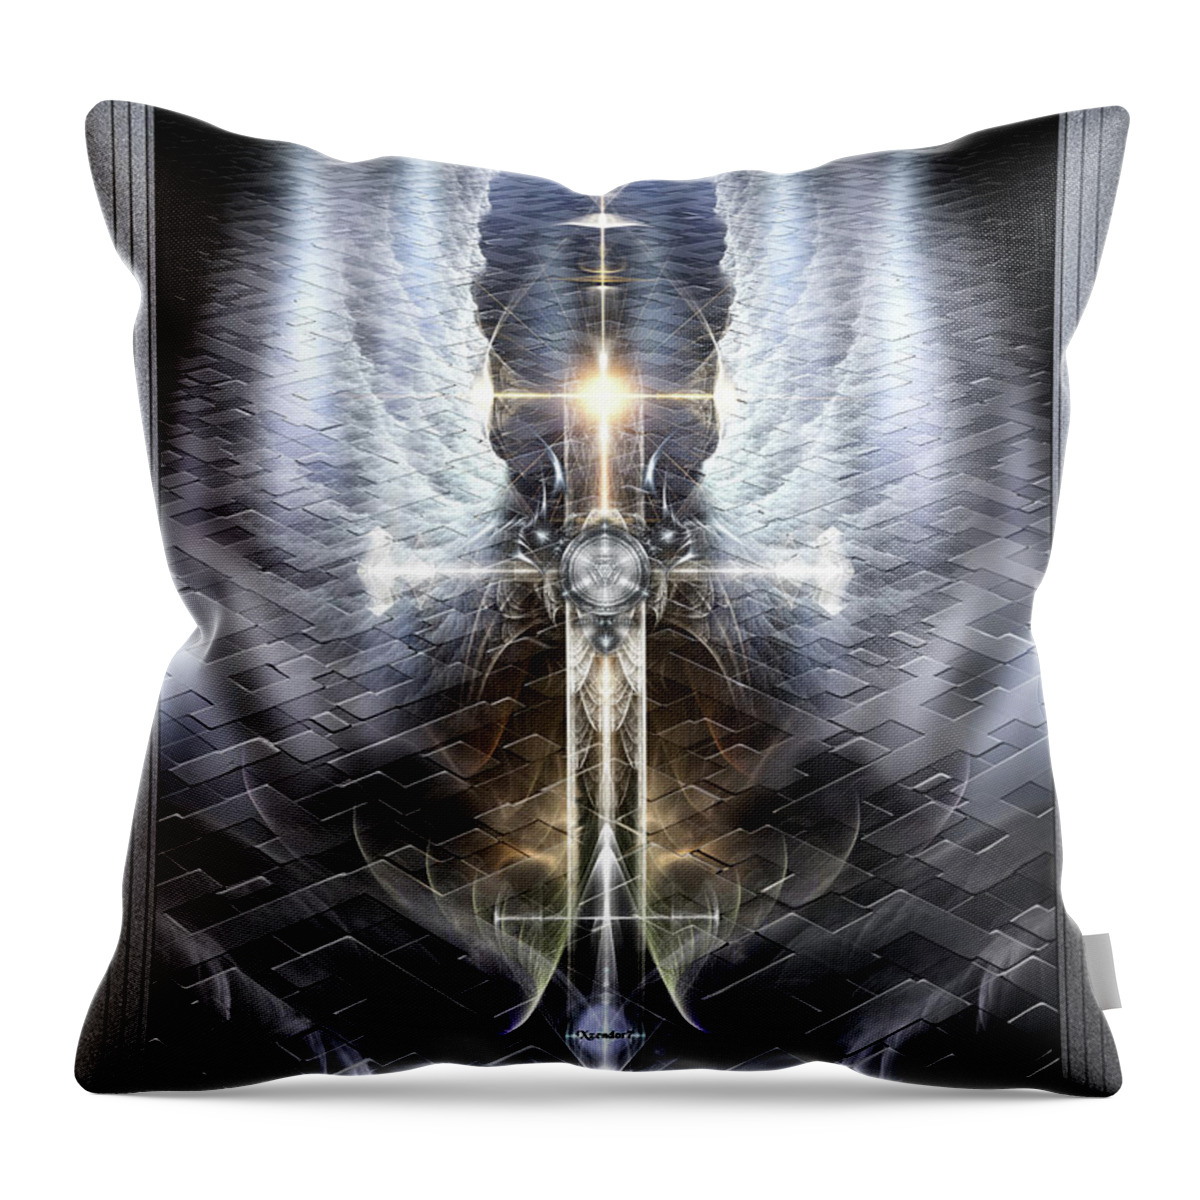 Heaven Throw Pillow featuring the painting Heavenly Angel Wings Cross The Jagged Road by Xzendor7 by Rolando Burbon